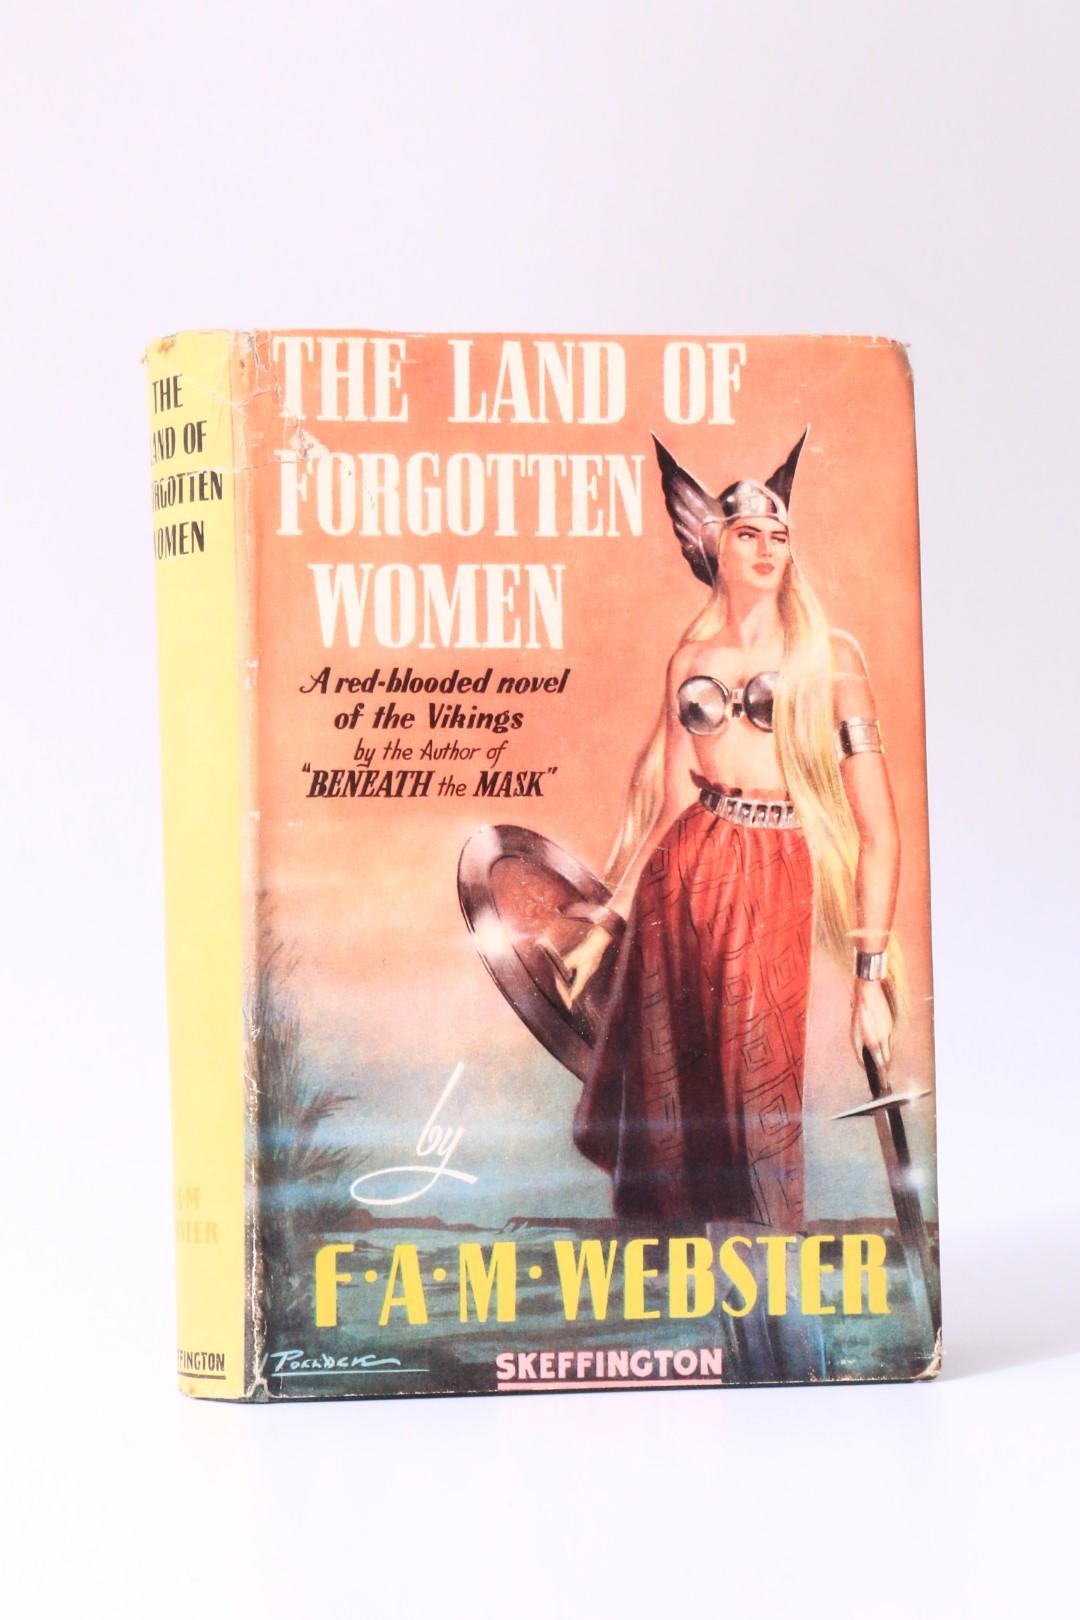 F.A.M. Webster - The Land of Forgotten Women - Skeffington, 1950, First Edition.